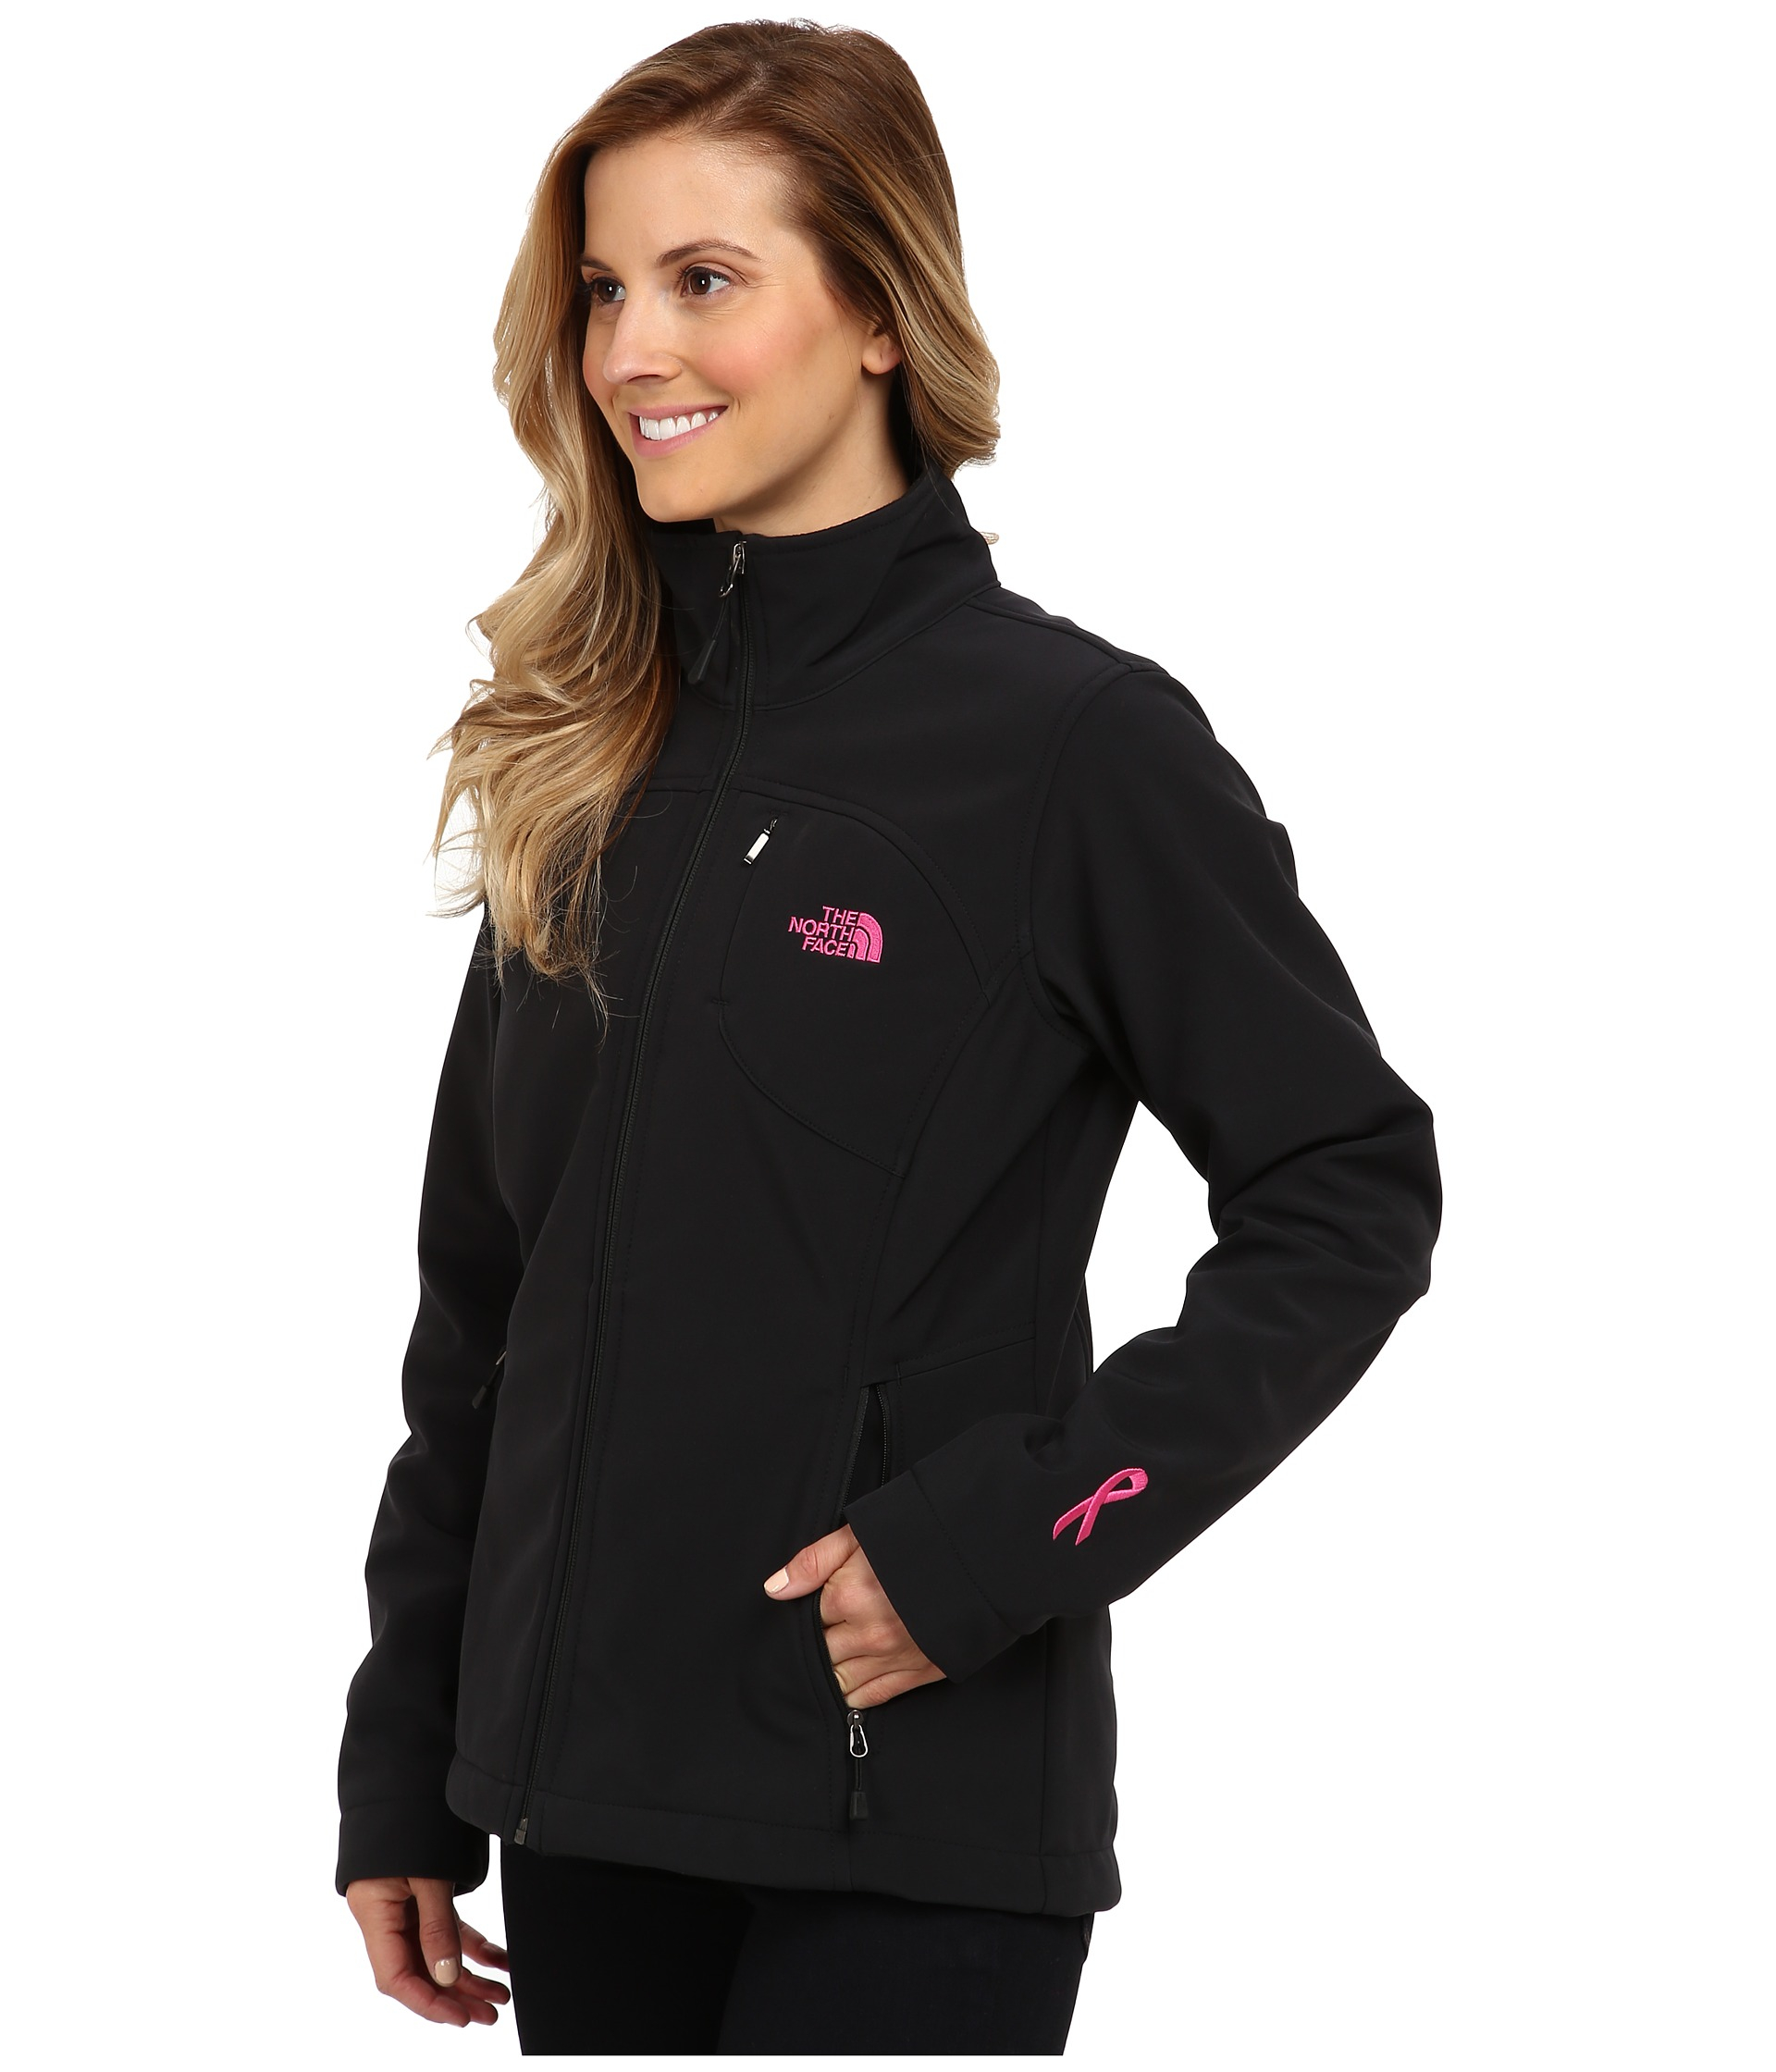 The North Face Black And Pink Jacket Online Shopping For Women Men Kids Fashion Lifestyle Free Delivery Returns